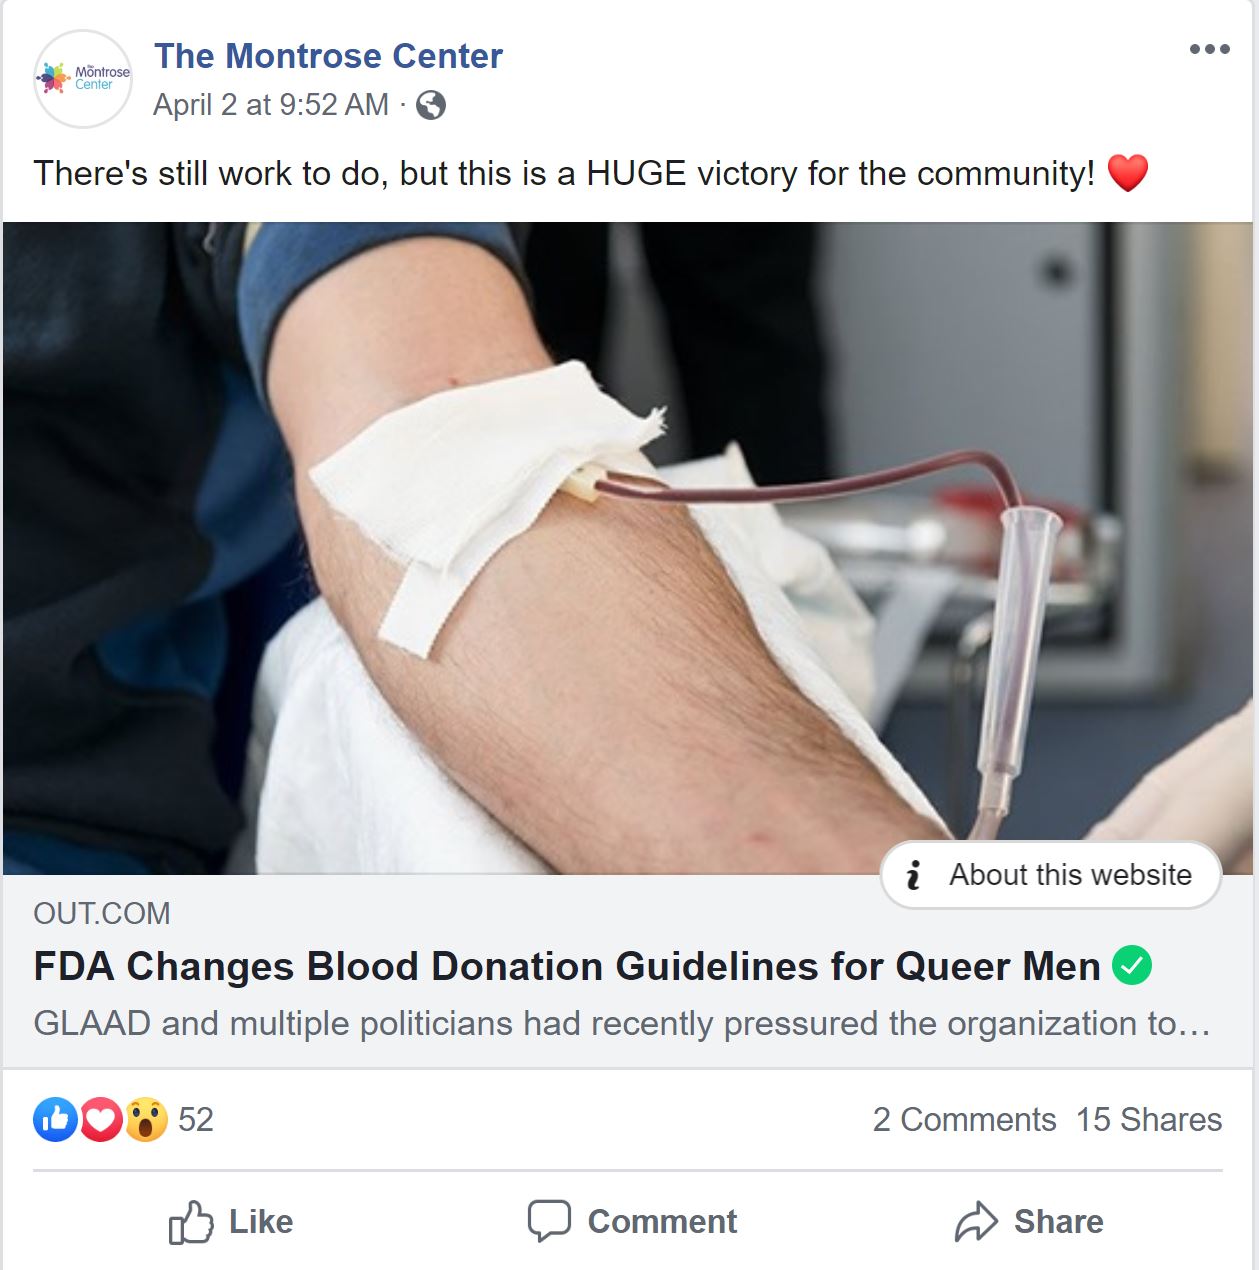 The Montrose Center's Facebook post on the FDA lowering blood donation restrictions. Screenshot by The Signal reporter, Teagan Findler.